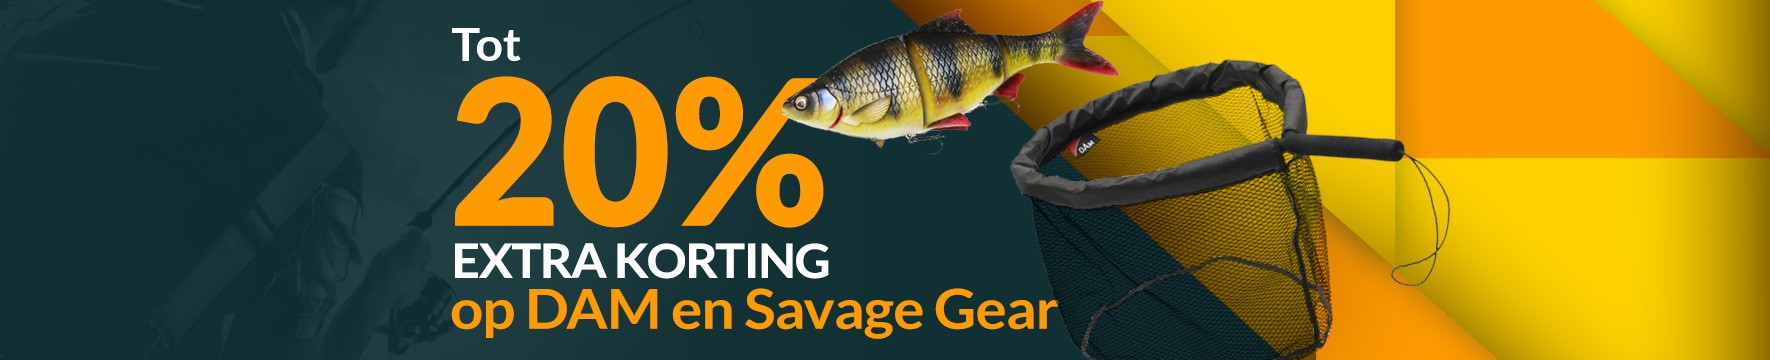 Category topbanner: Tot 20% DAM & Savage Gear